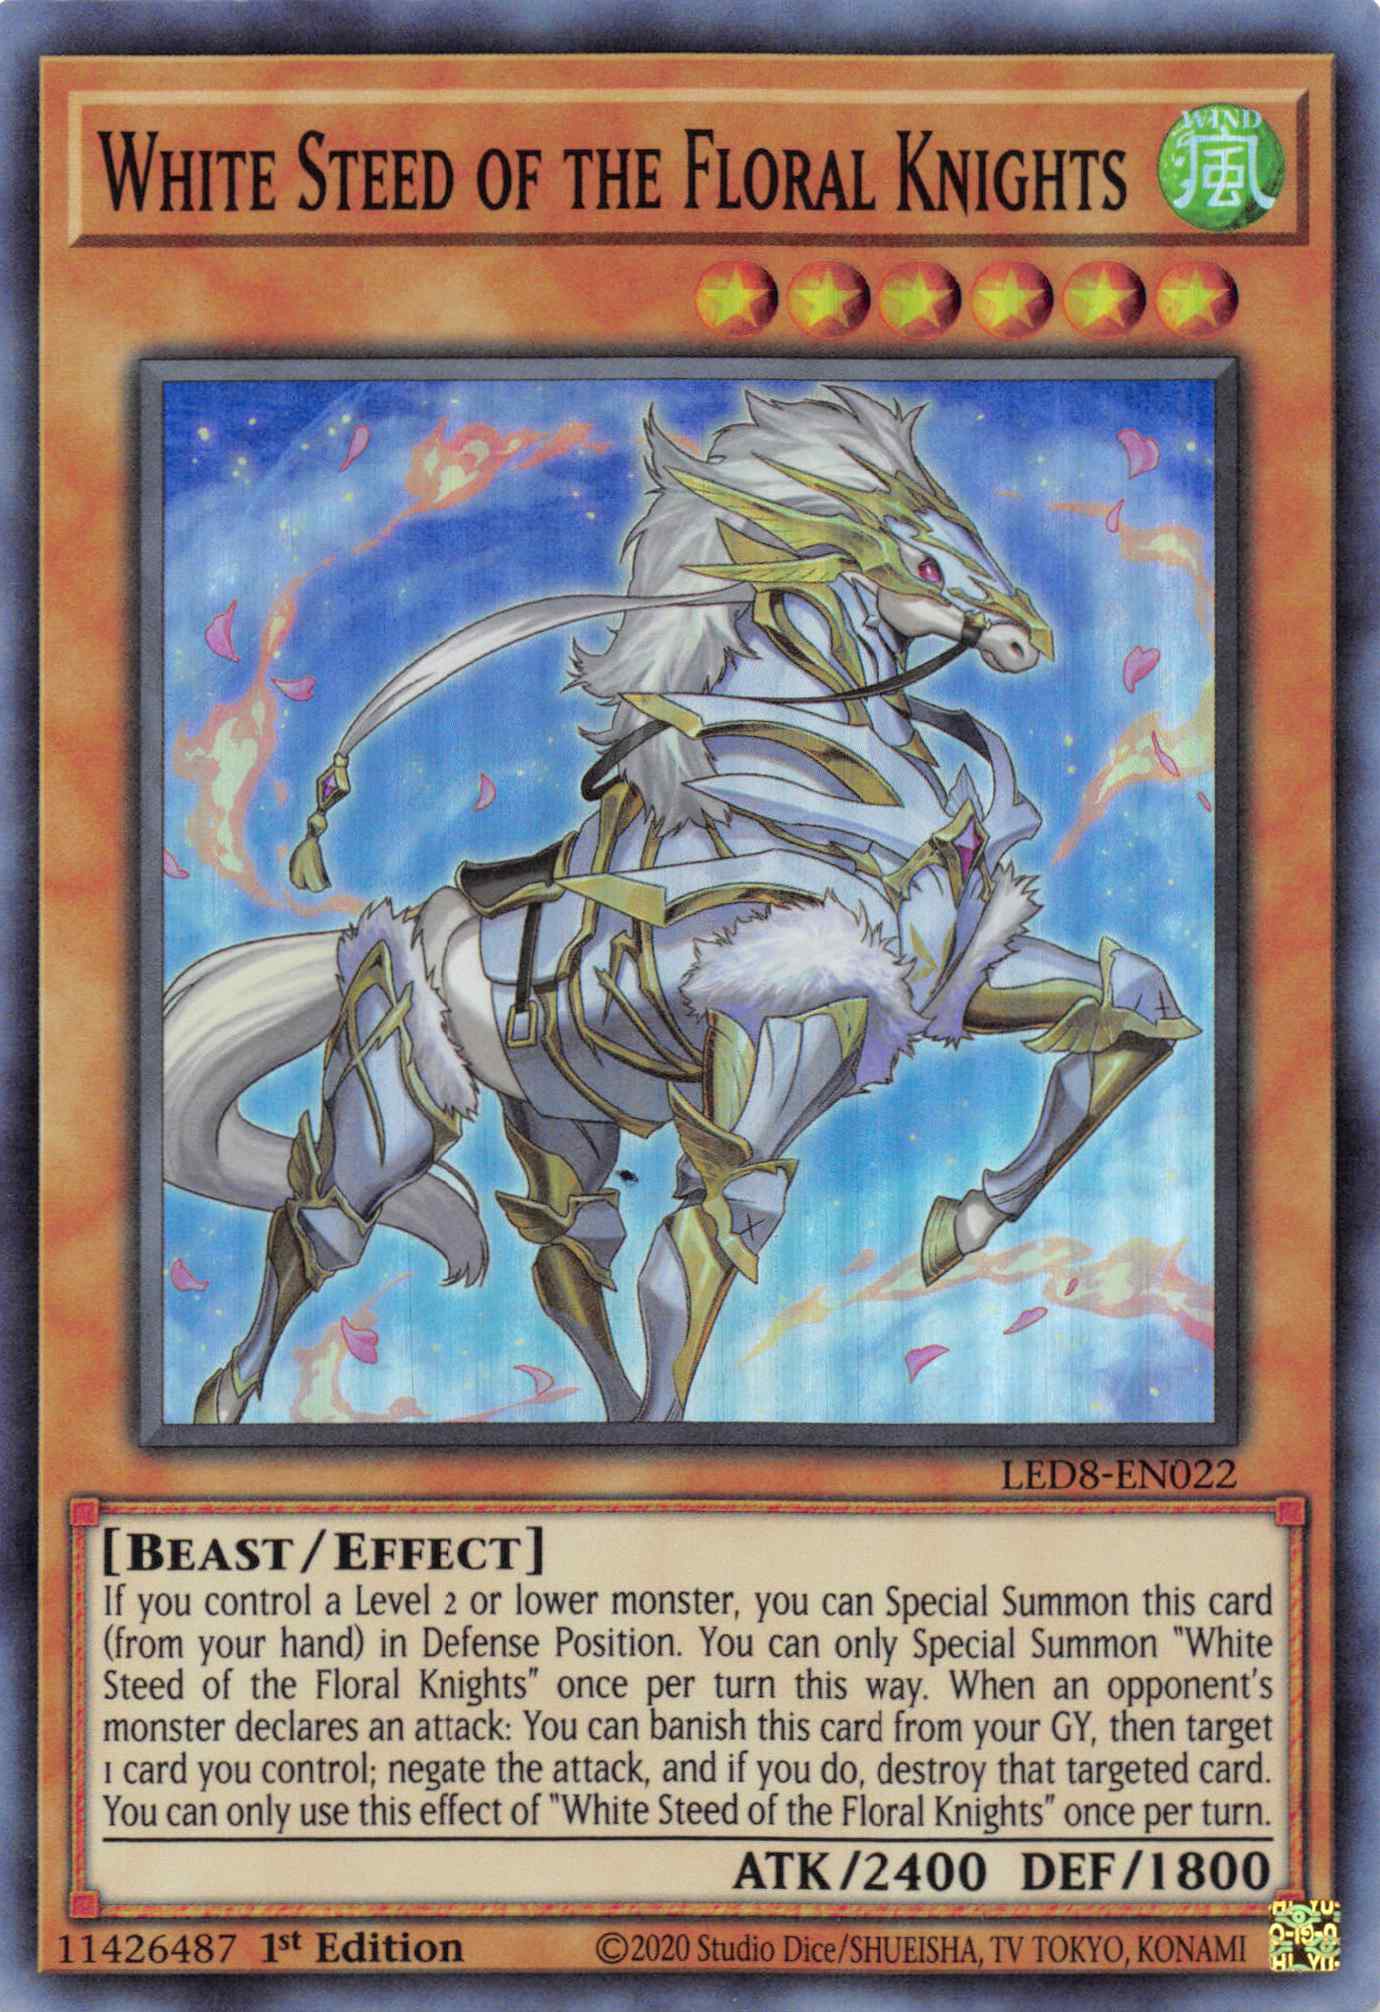 White Steed of the Floral Knights [LED8-EN022] Super Rare - Duel Kingdom